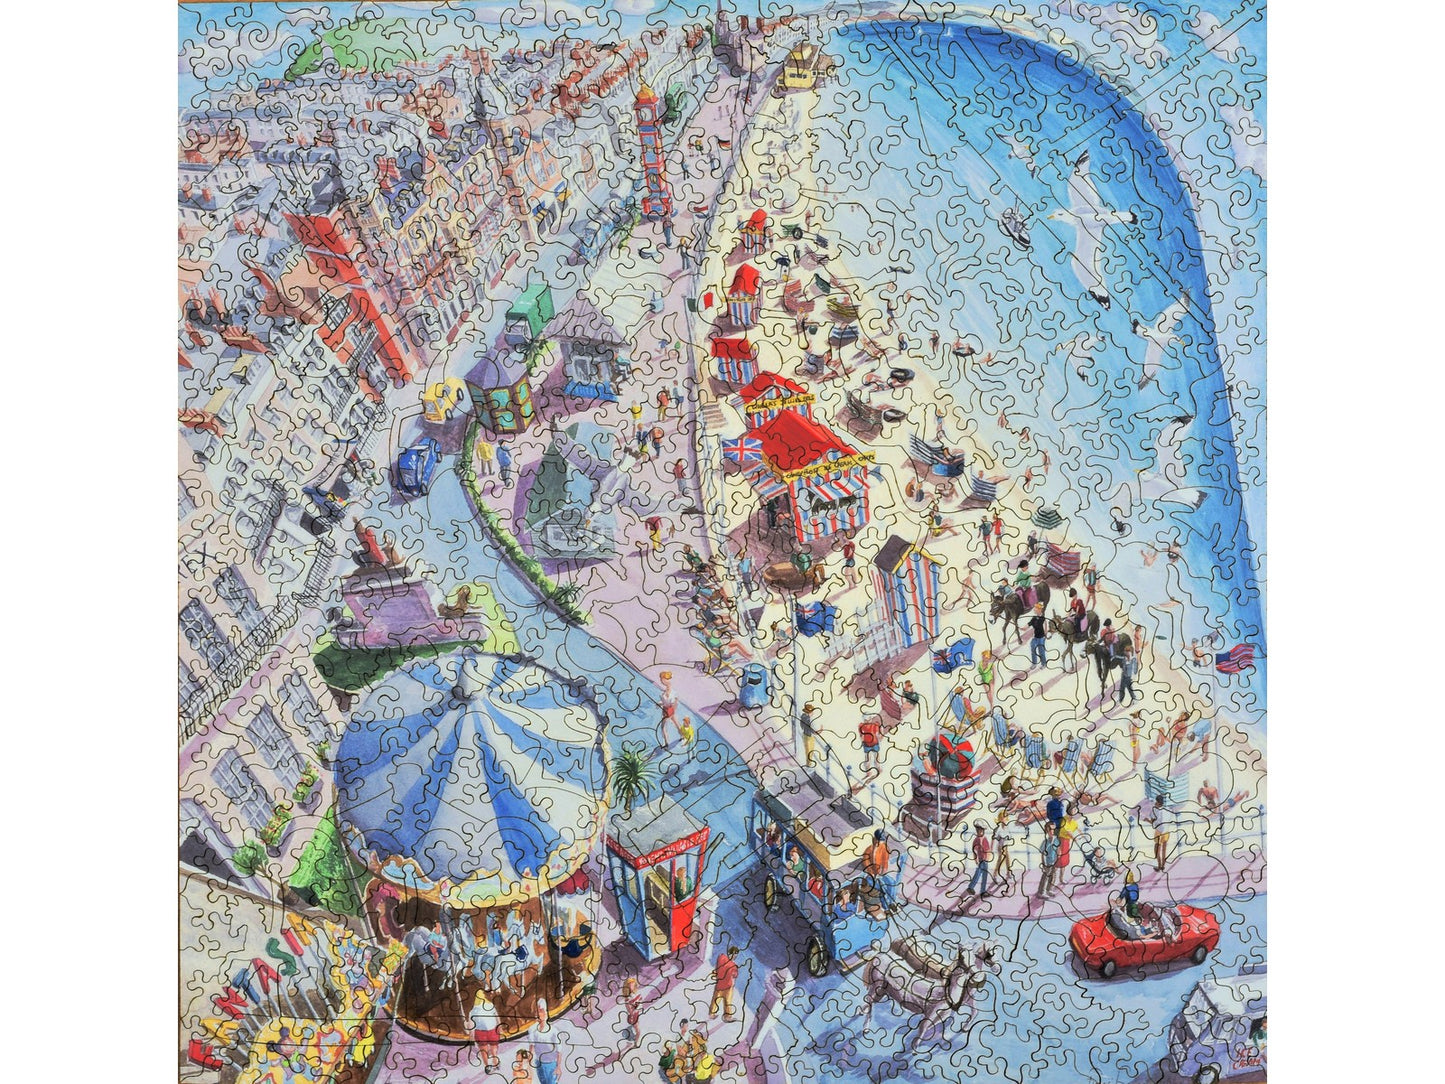 The front of the puzzle, August in Weymouth, which shows a beach in the summertime.